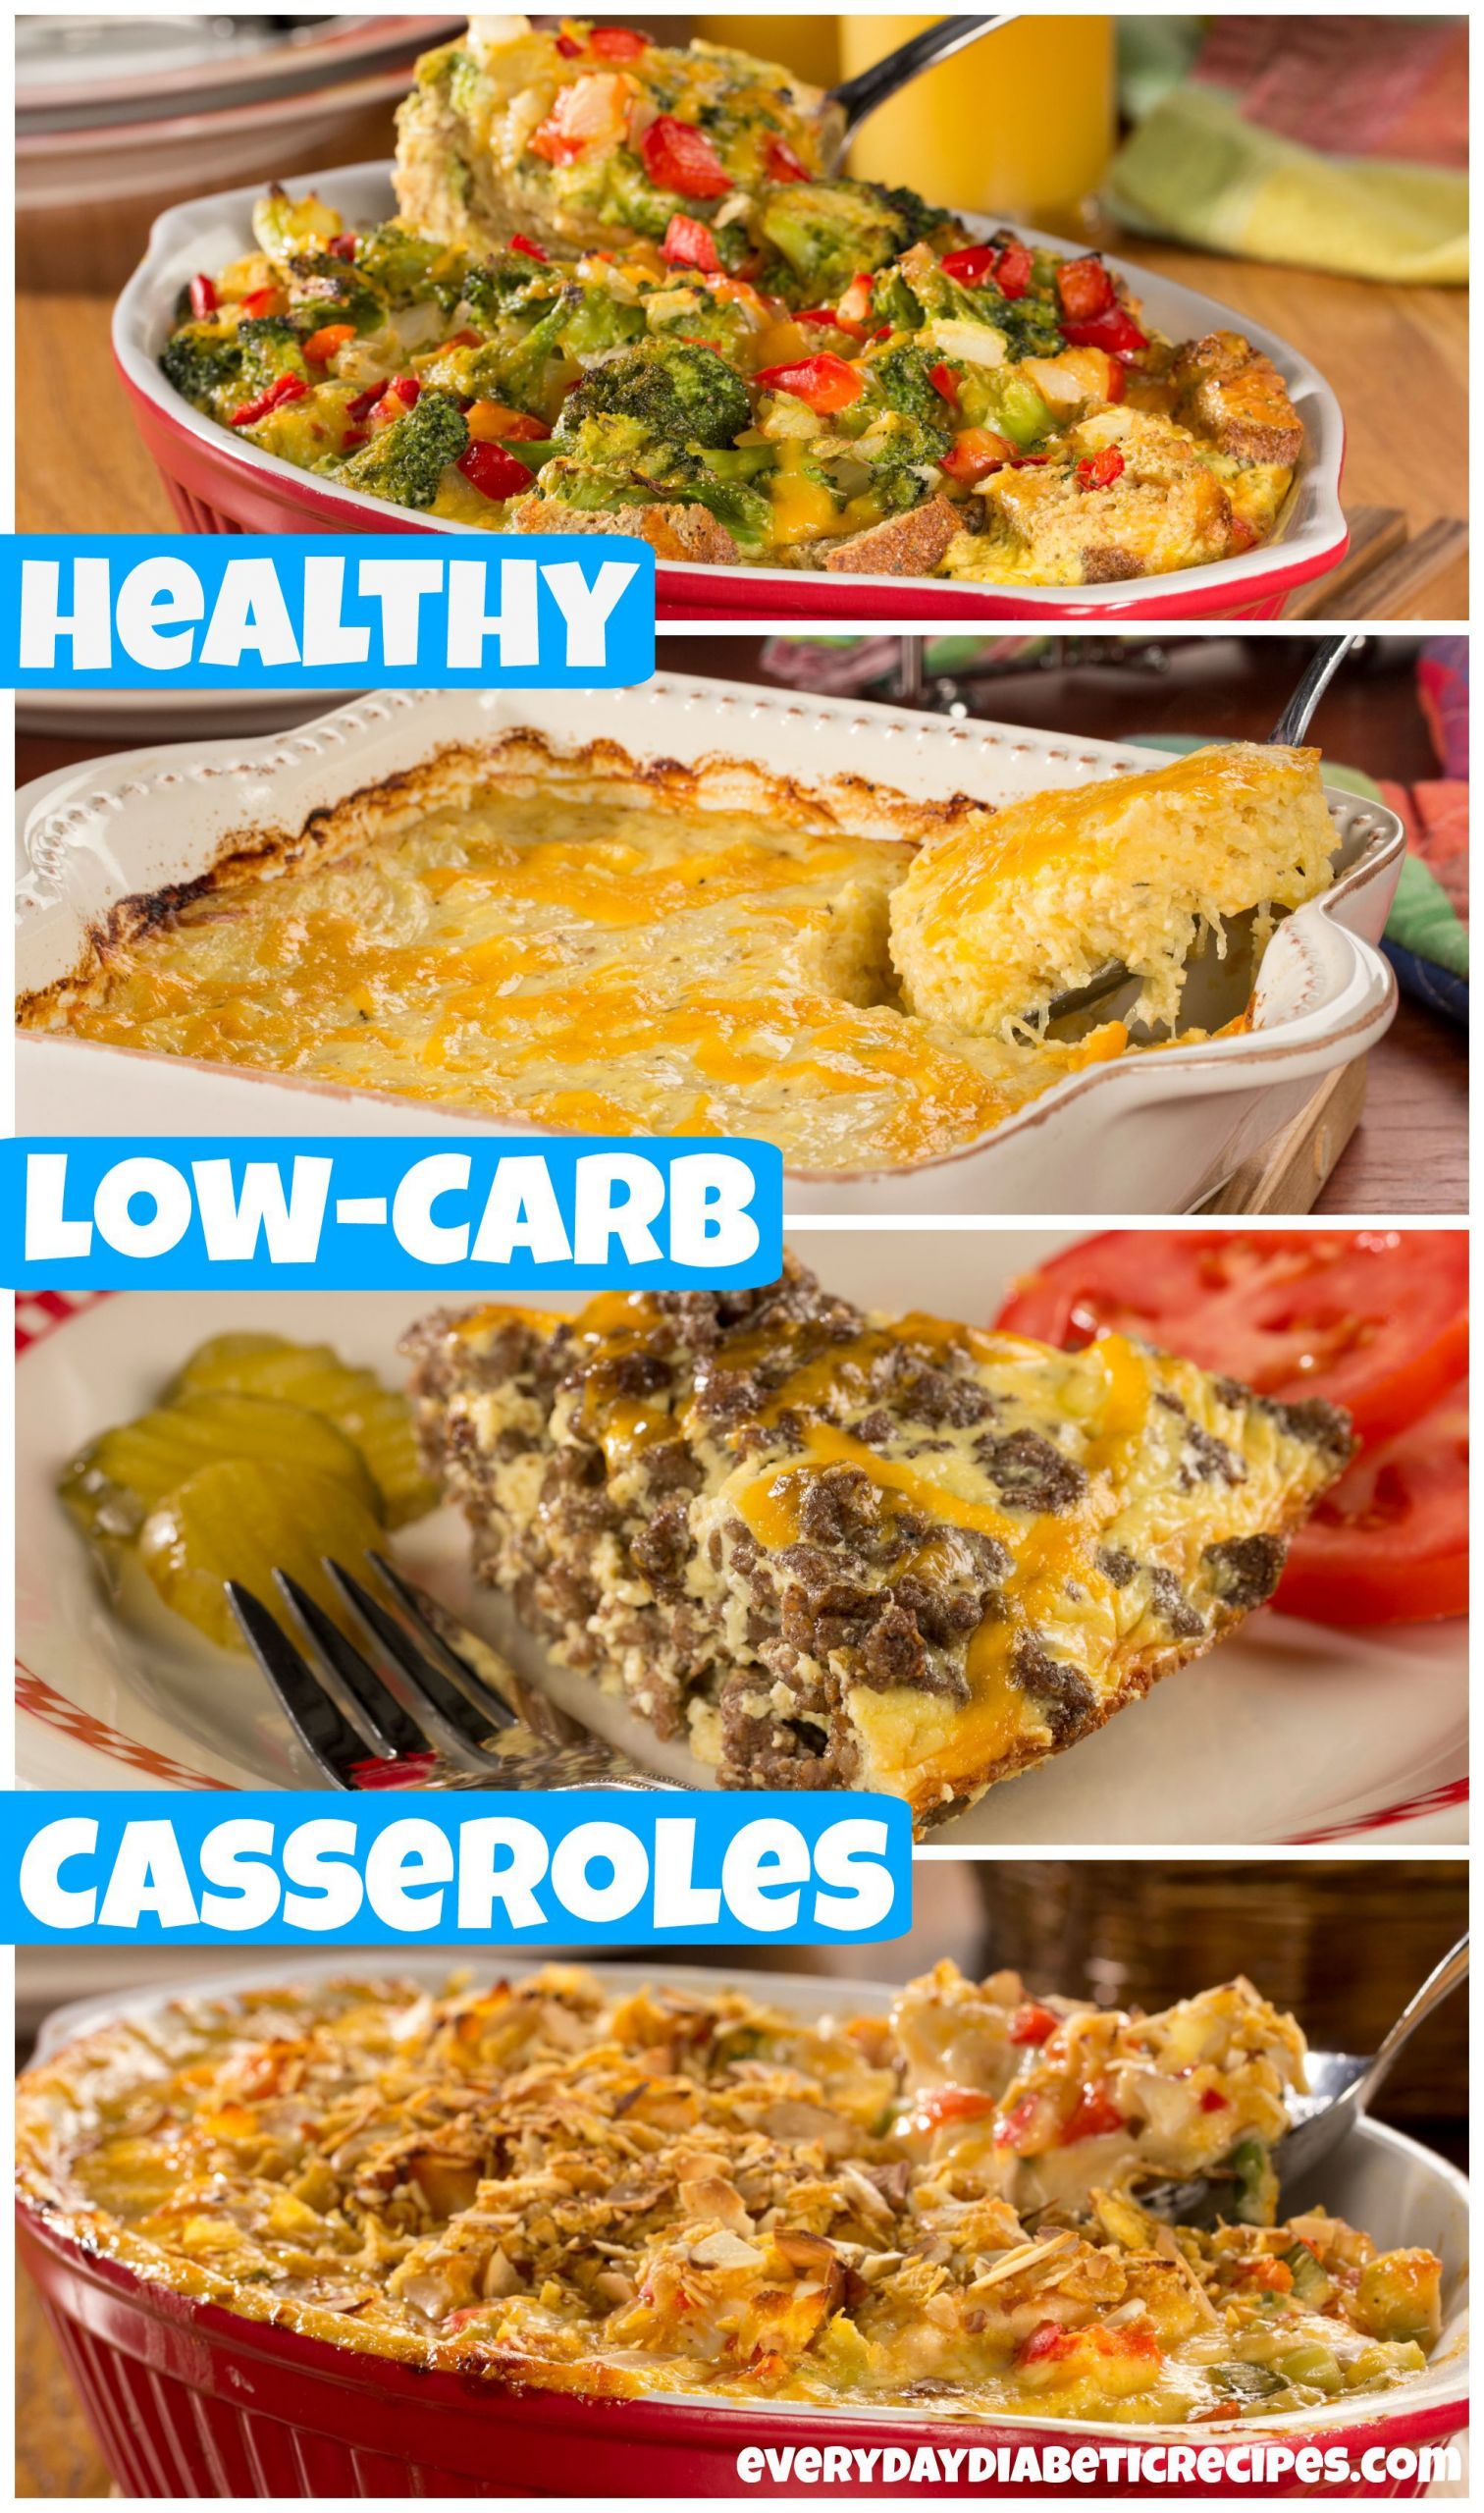 Easy Diabetic Recipes Low Carb
 The 25 best Easy diabetic recipes ideas on Pinterest